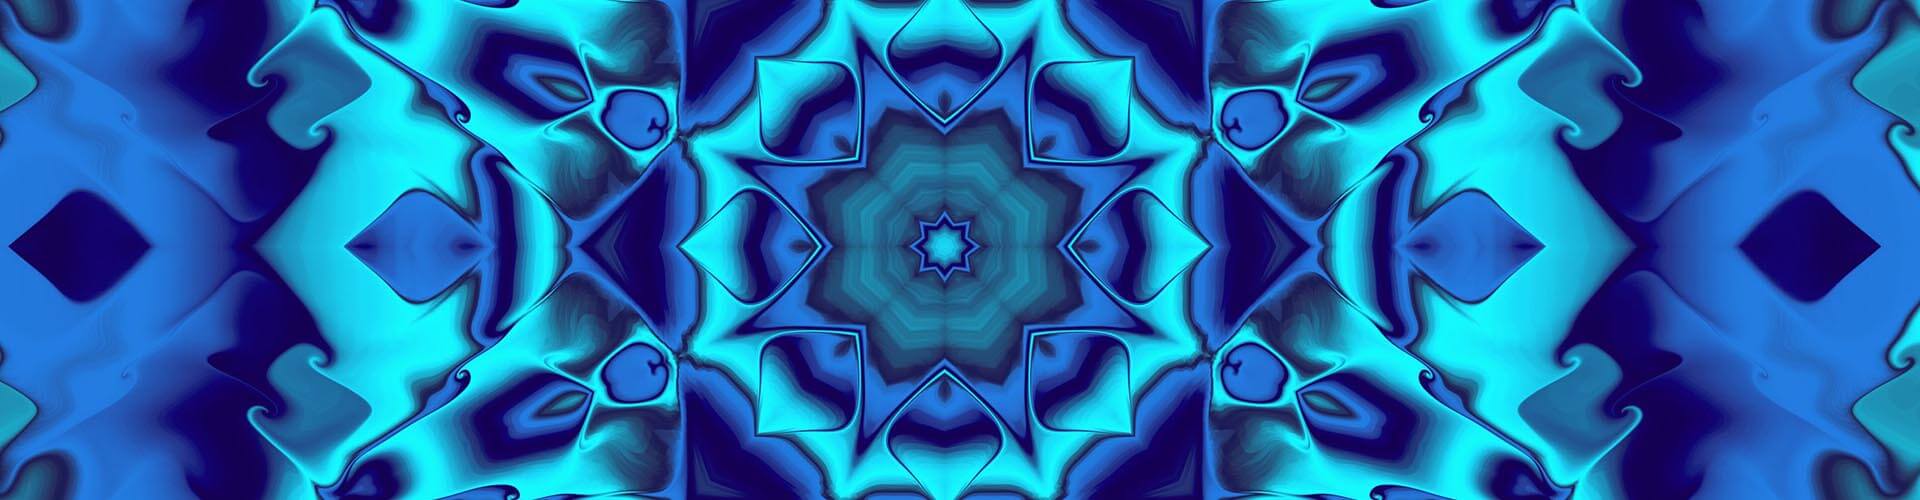 How to Turn Your Images into Kaleidoscope Patterns